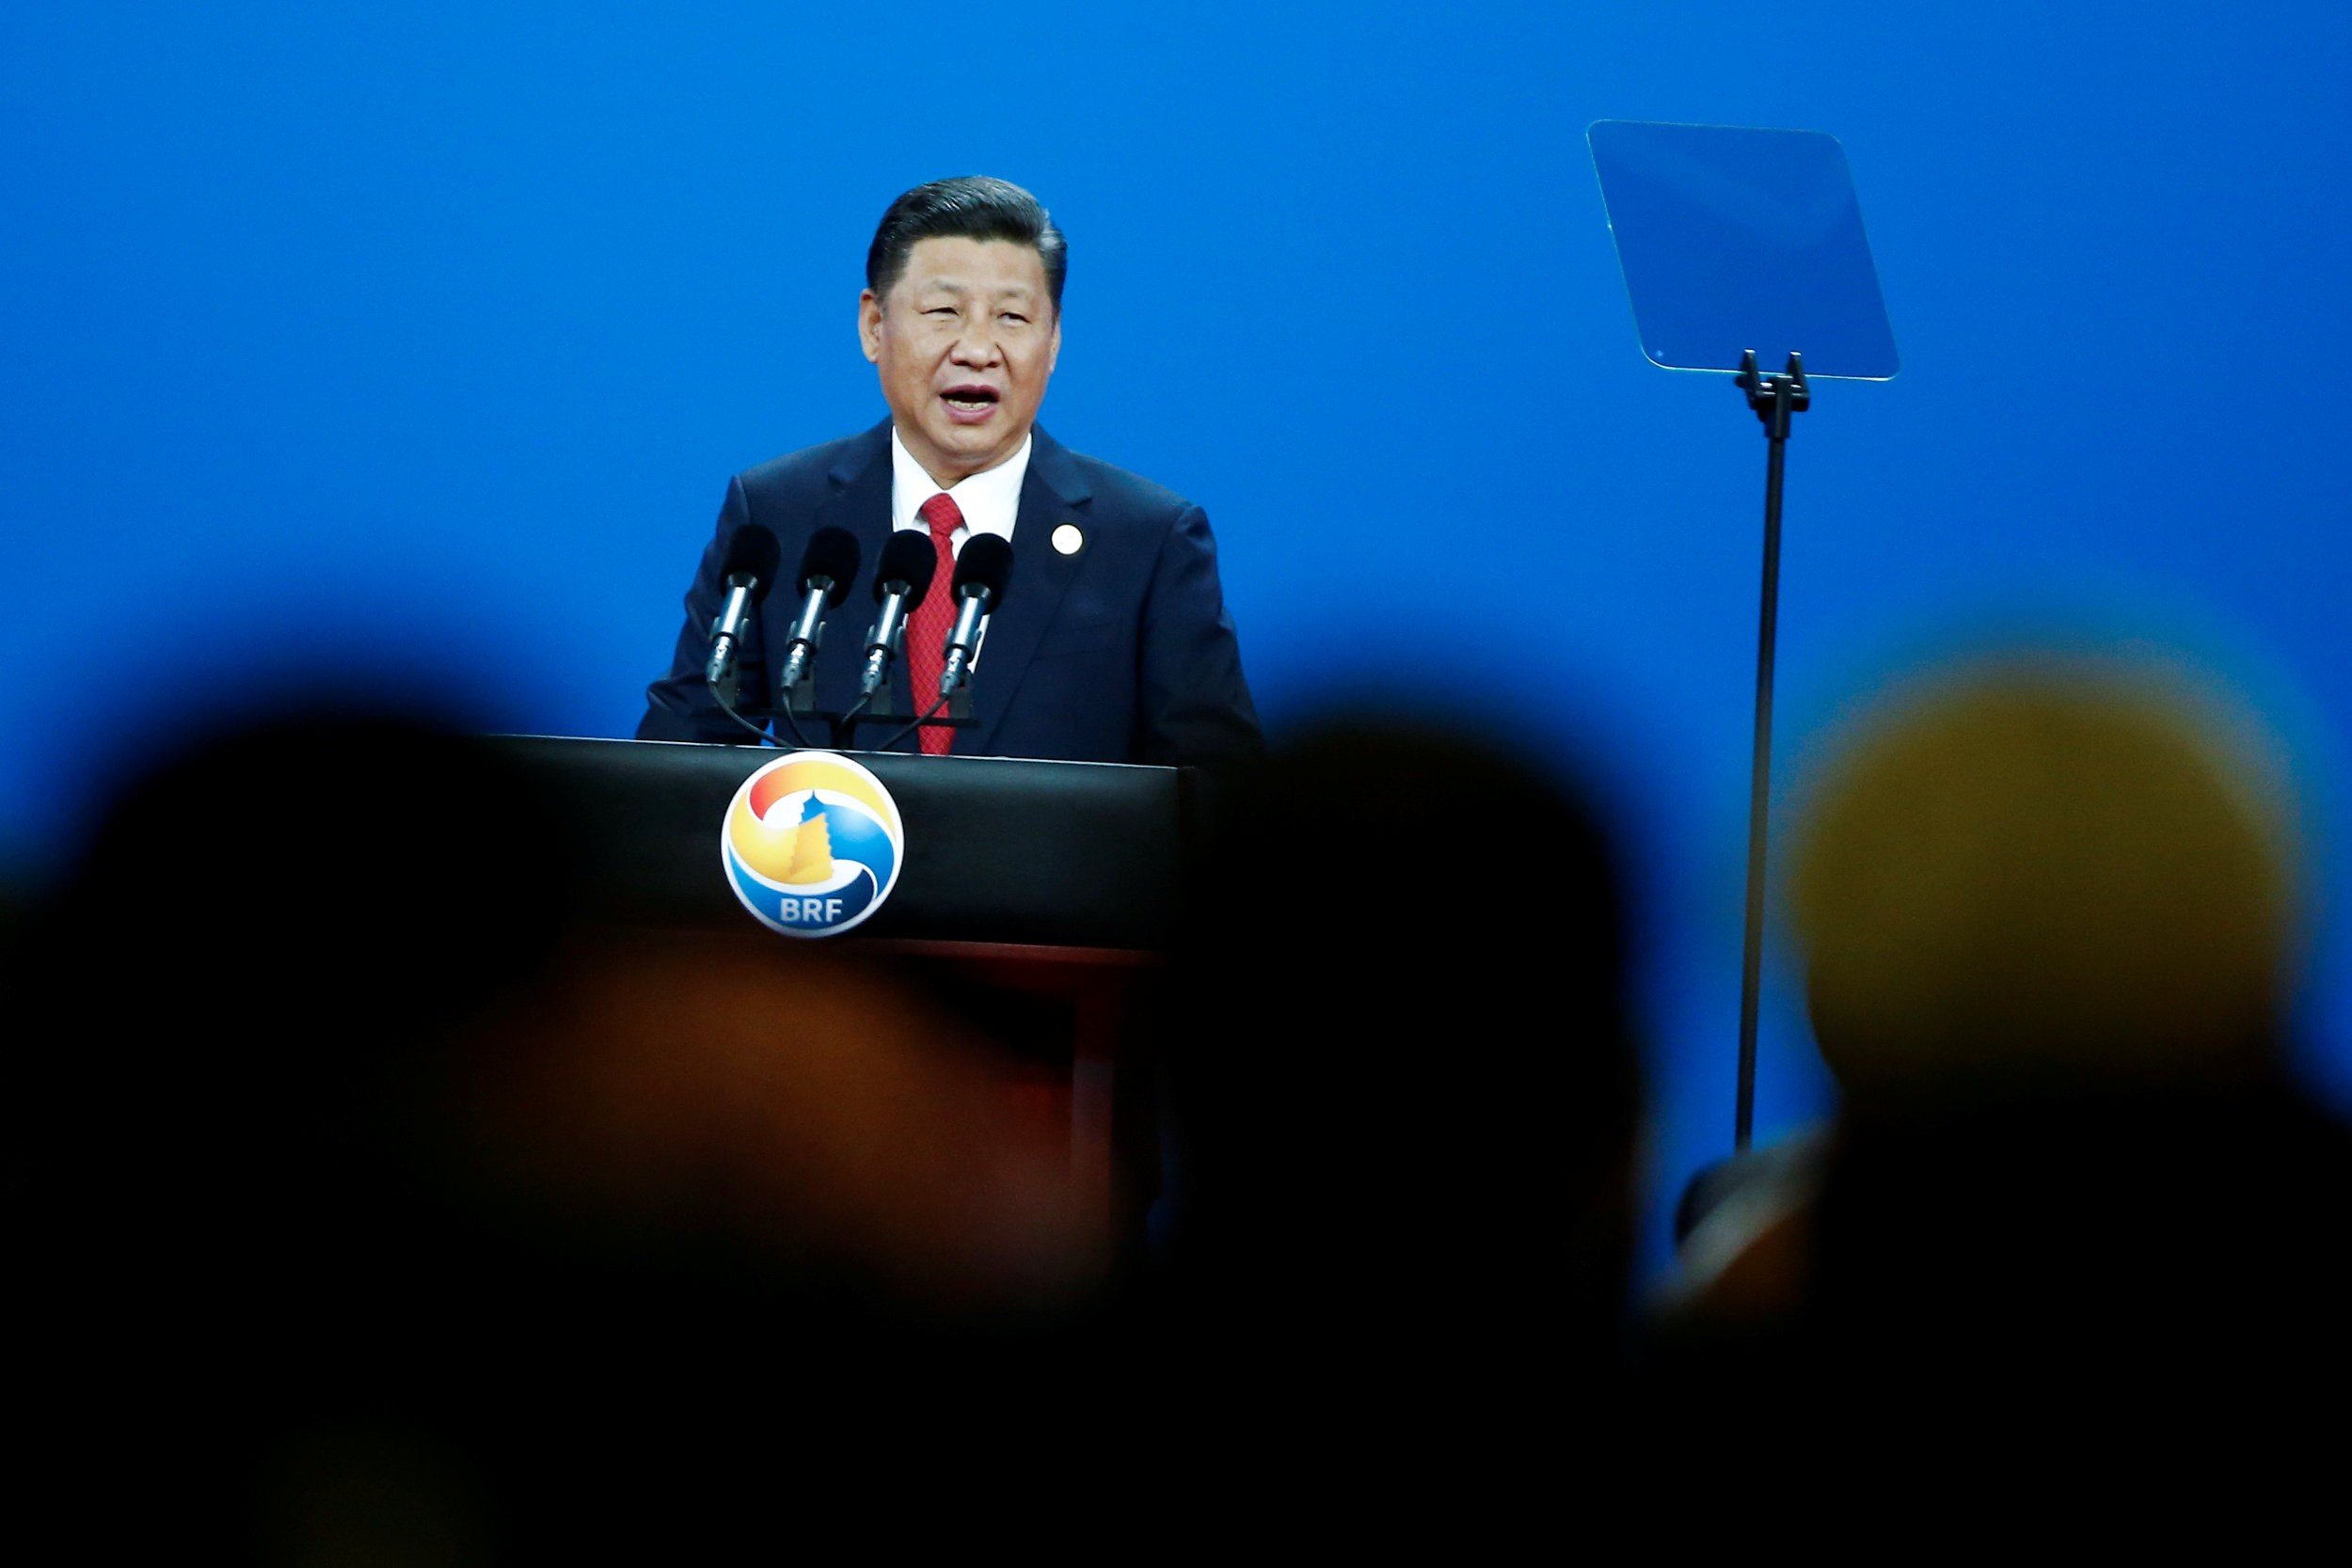 Chinese President Xi Jinping at the Belt and Road Forum in Beijing. Photo: Reuters